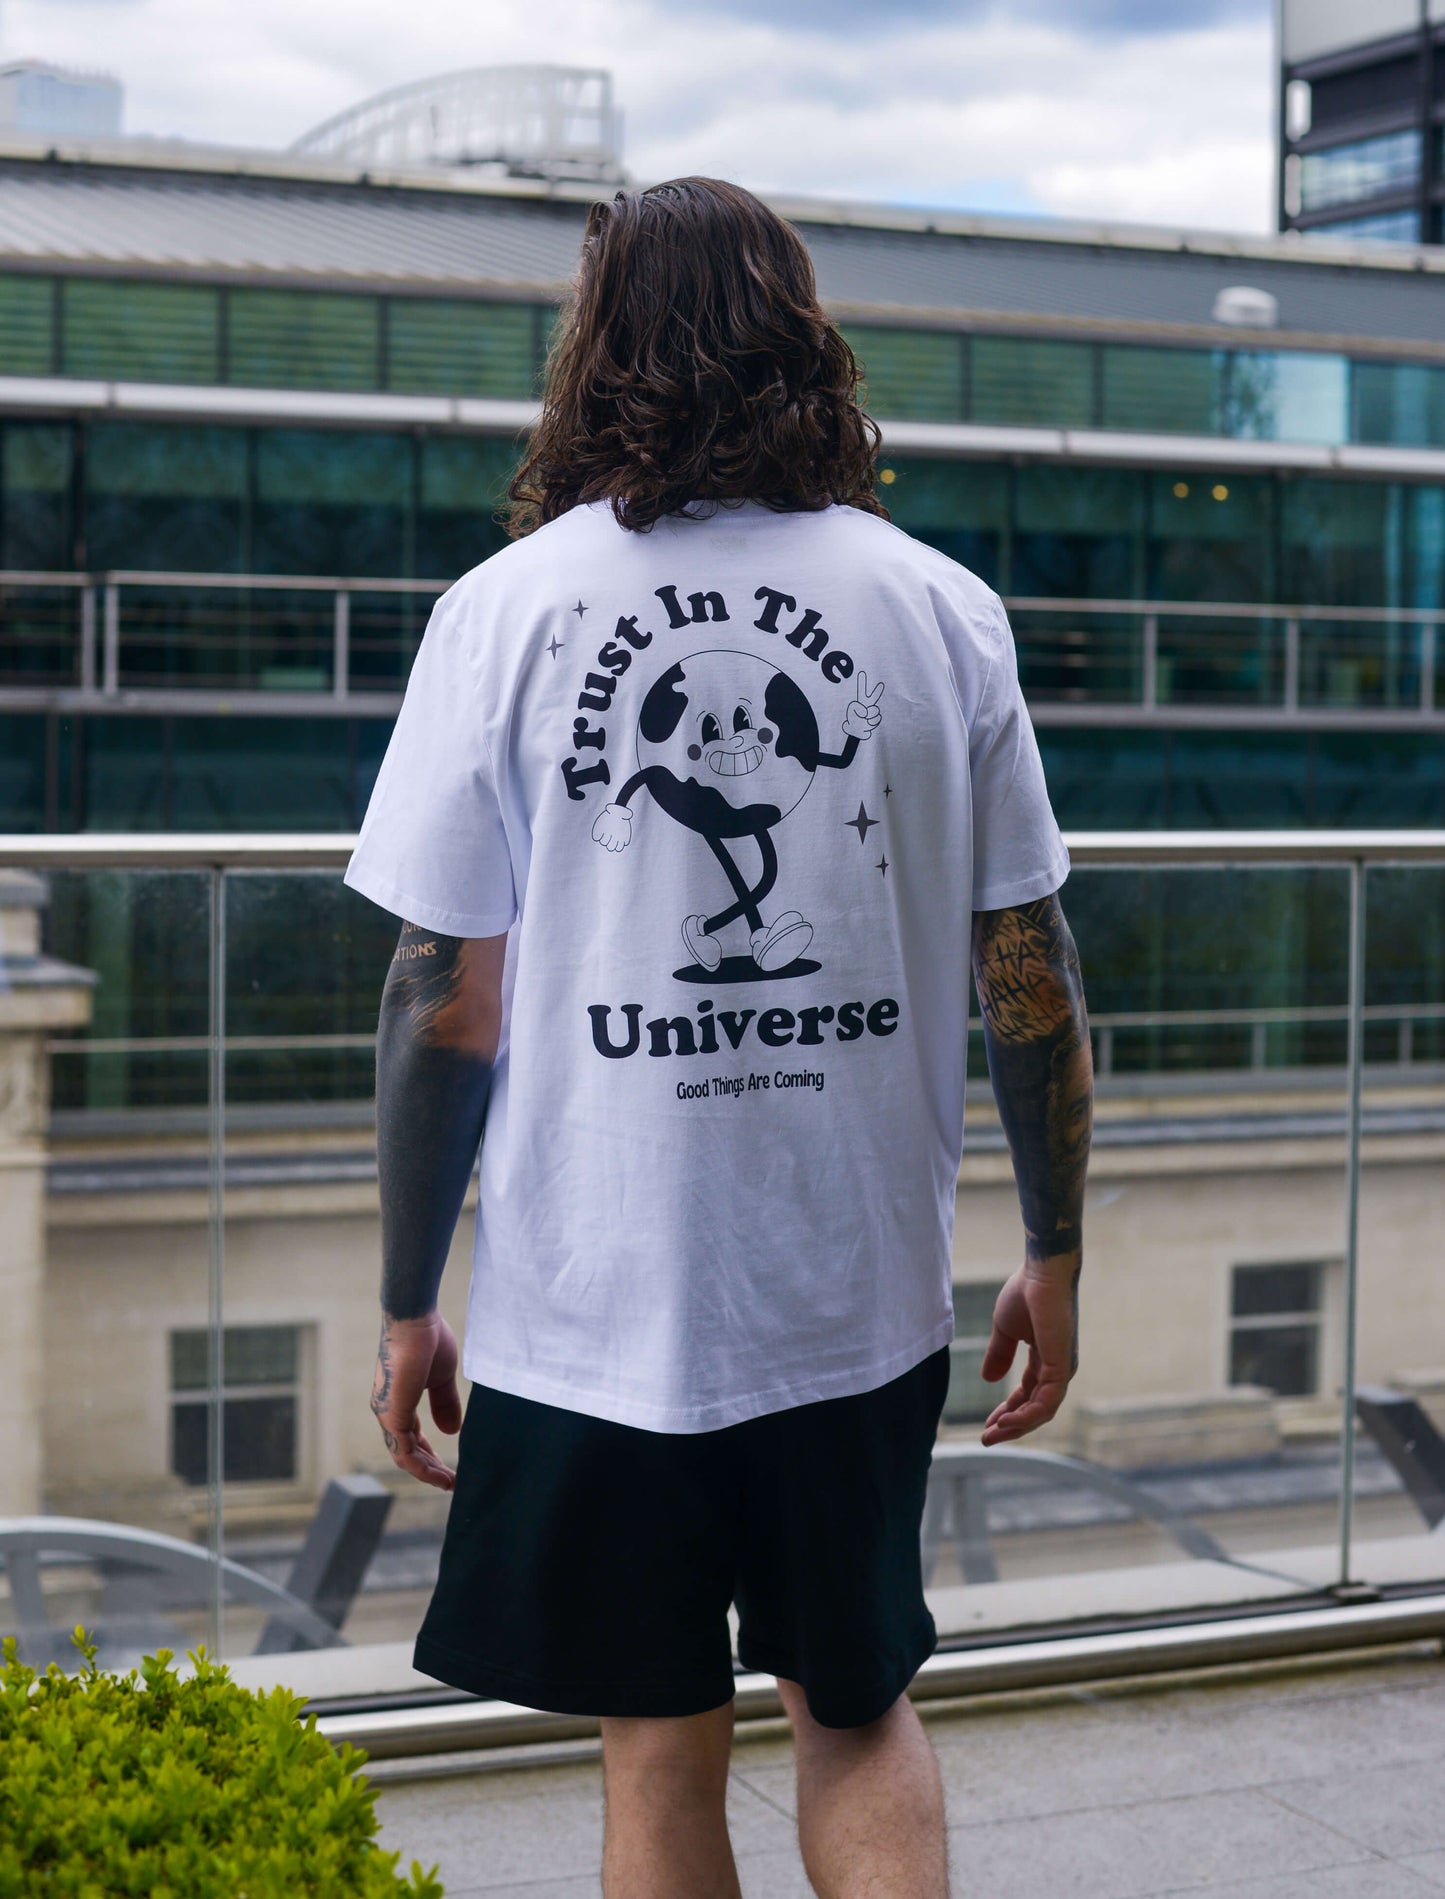 Trust in the universe tee, positive t-shirt, affirmation clothing, streetwear, unisex clothing. Man with tattoos 